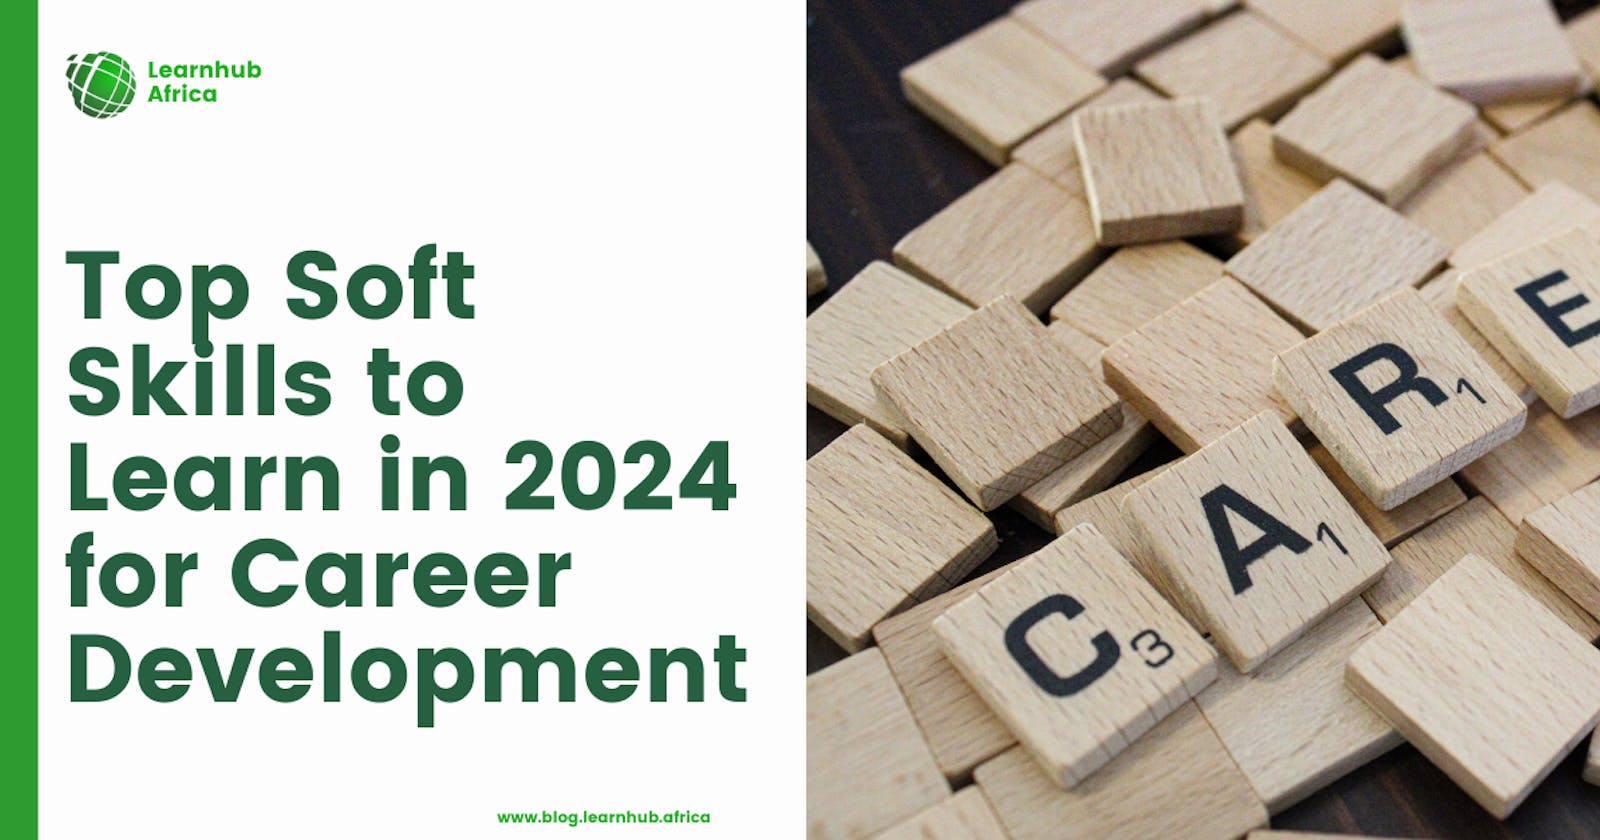 Top Soft Skills to Learn in 2024 for Career Development